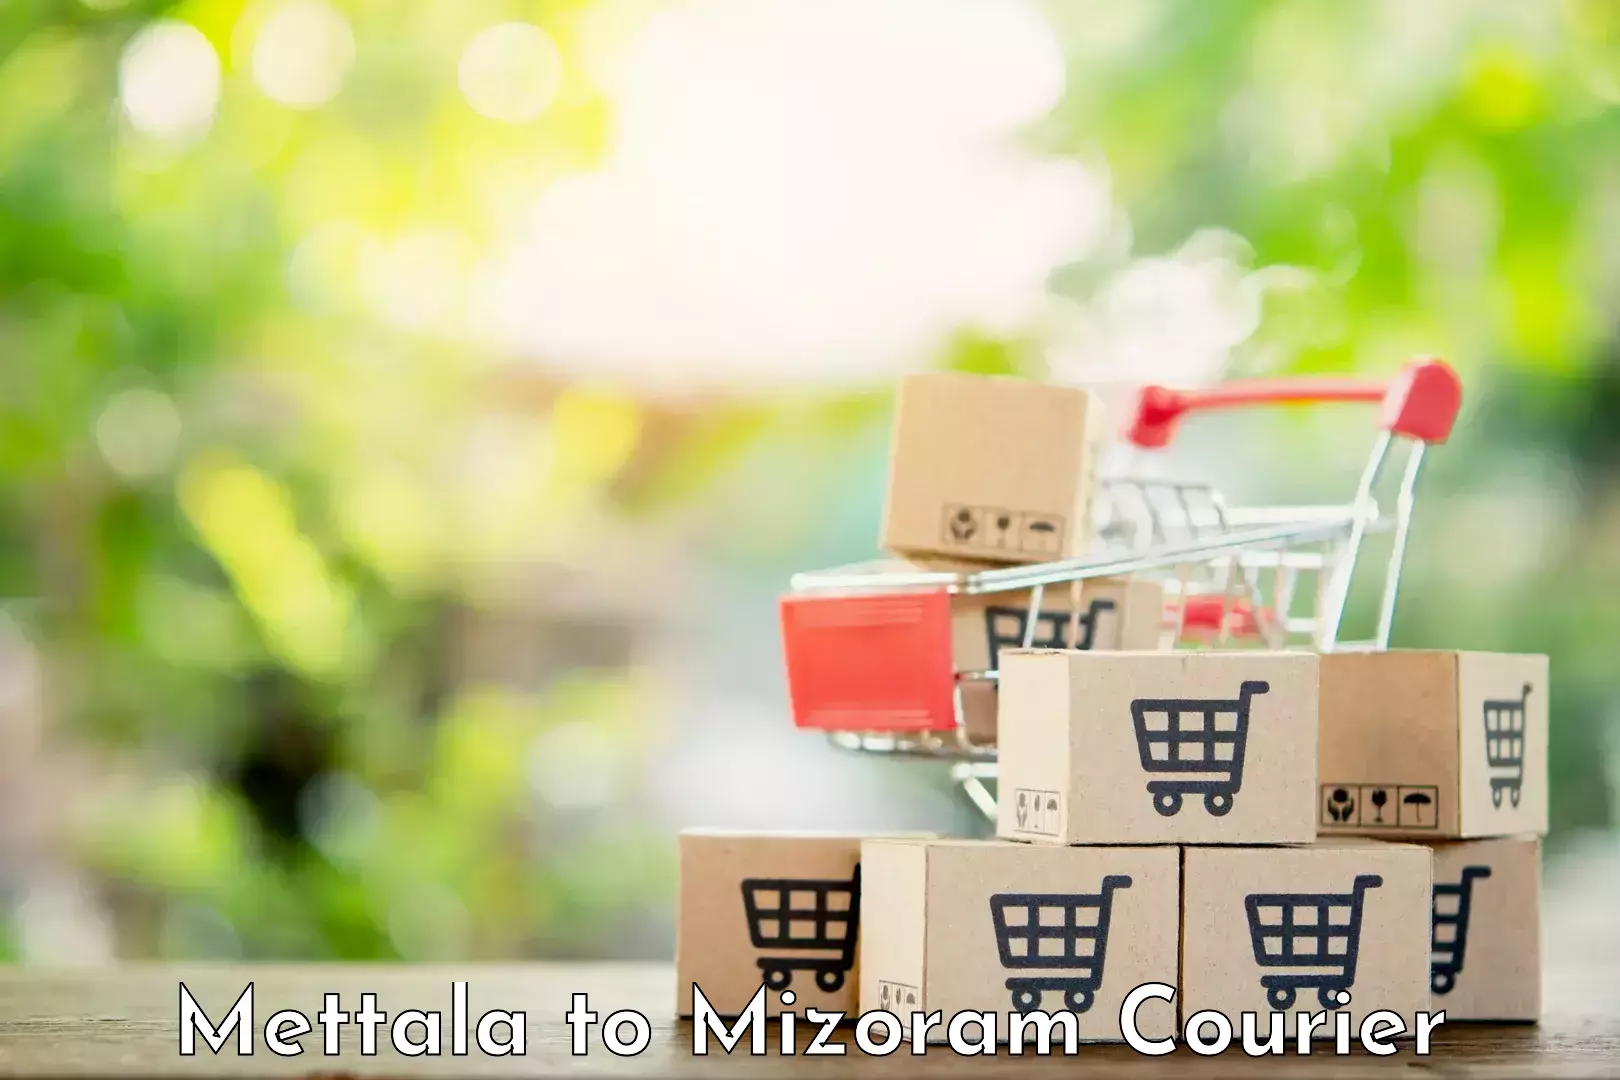 Full-service courier options Mettala to Siaha